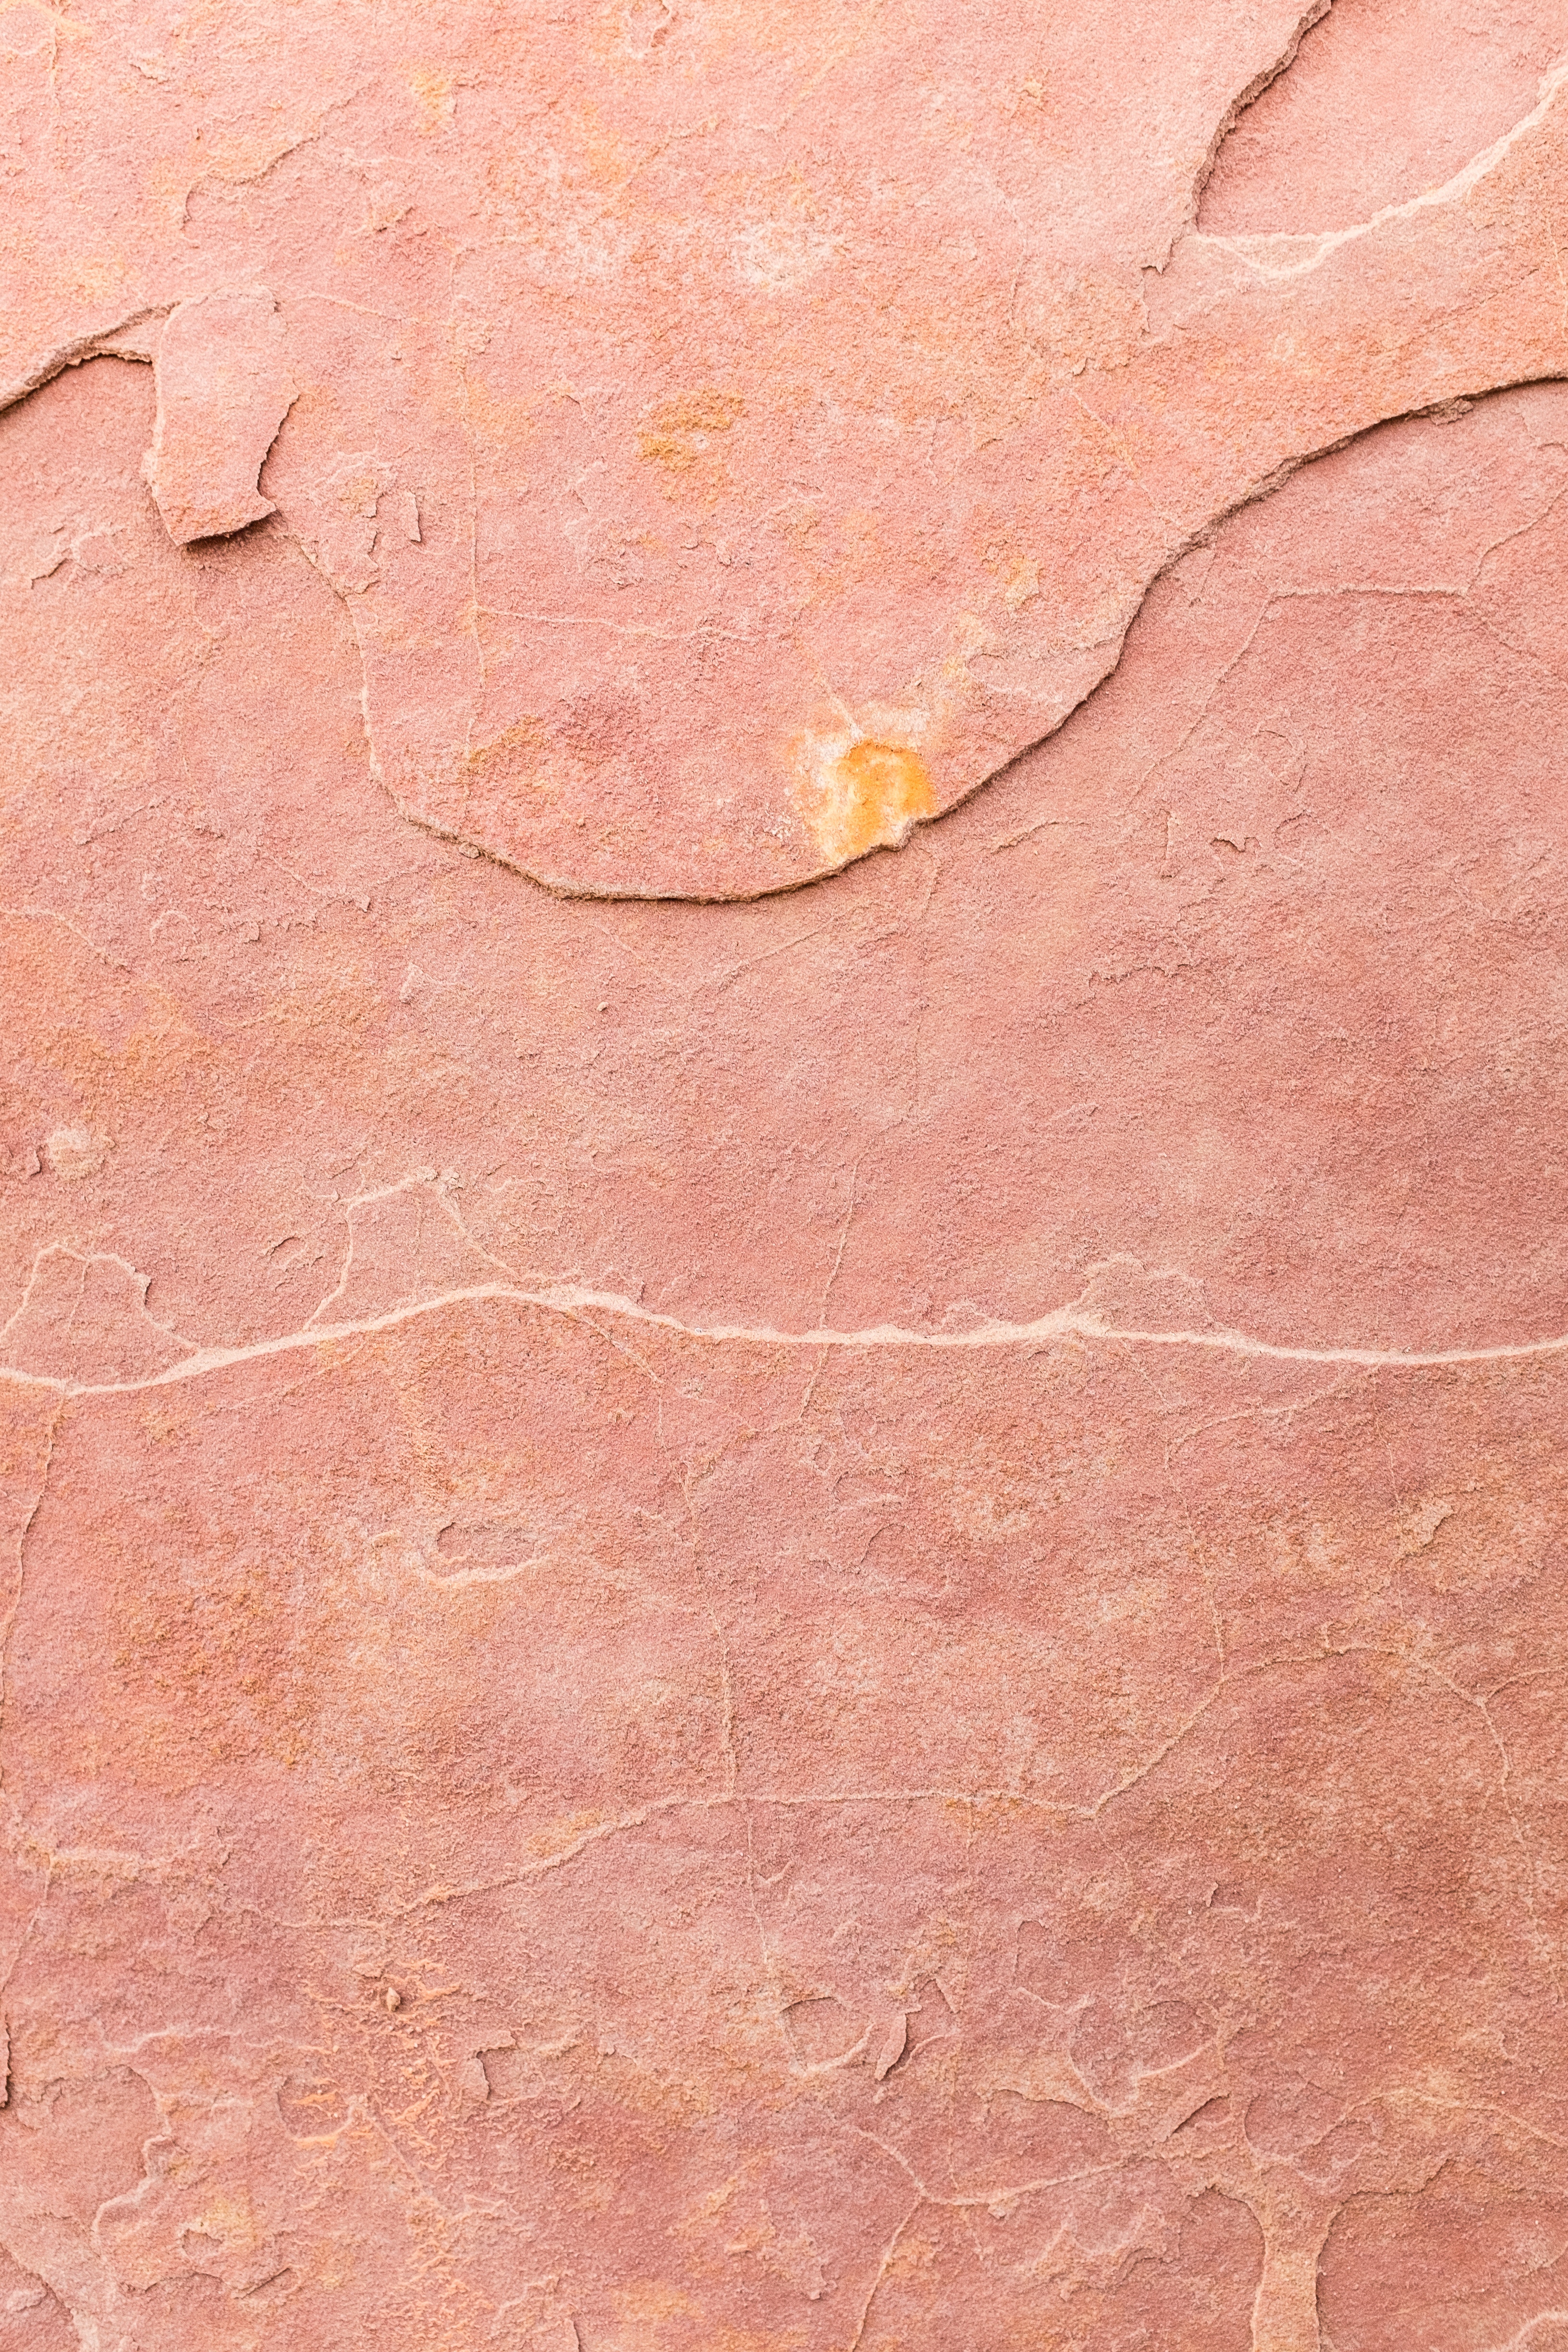 pink, rock, texture, textures, surface, stone, invoice, flaky, peeled iphone wallpaper